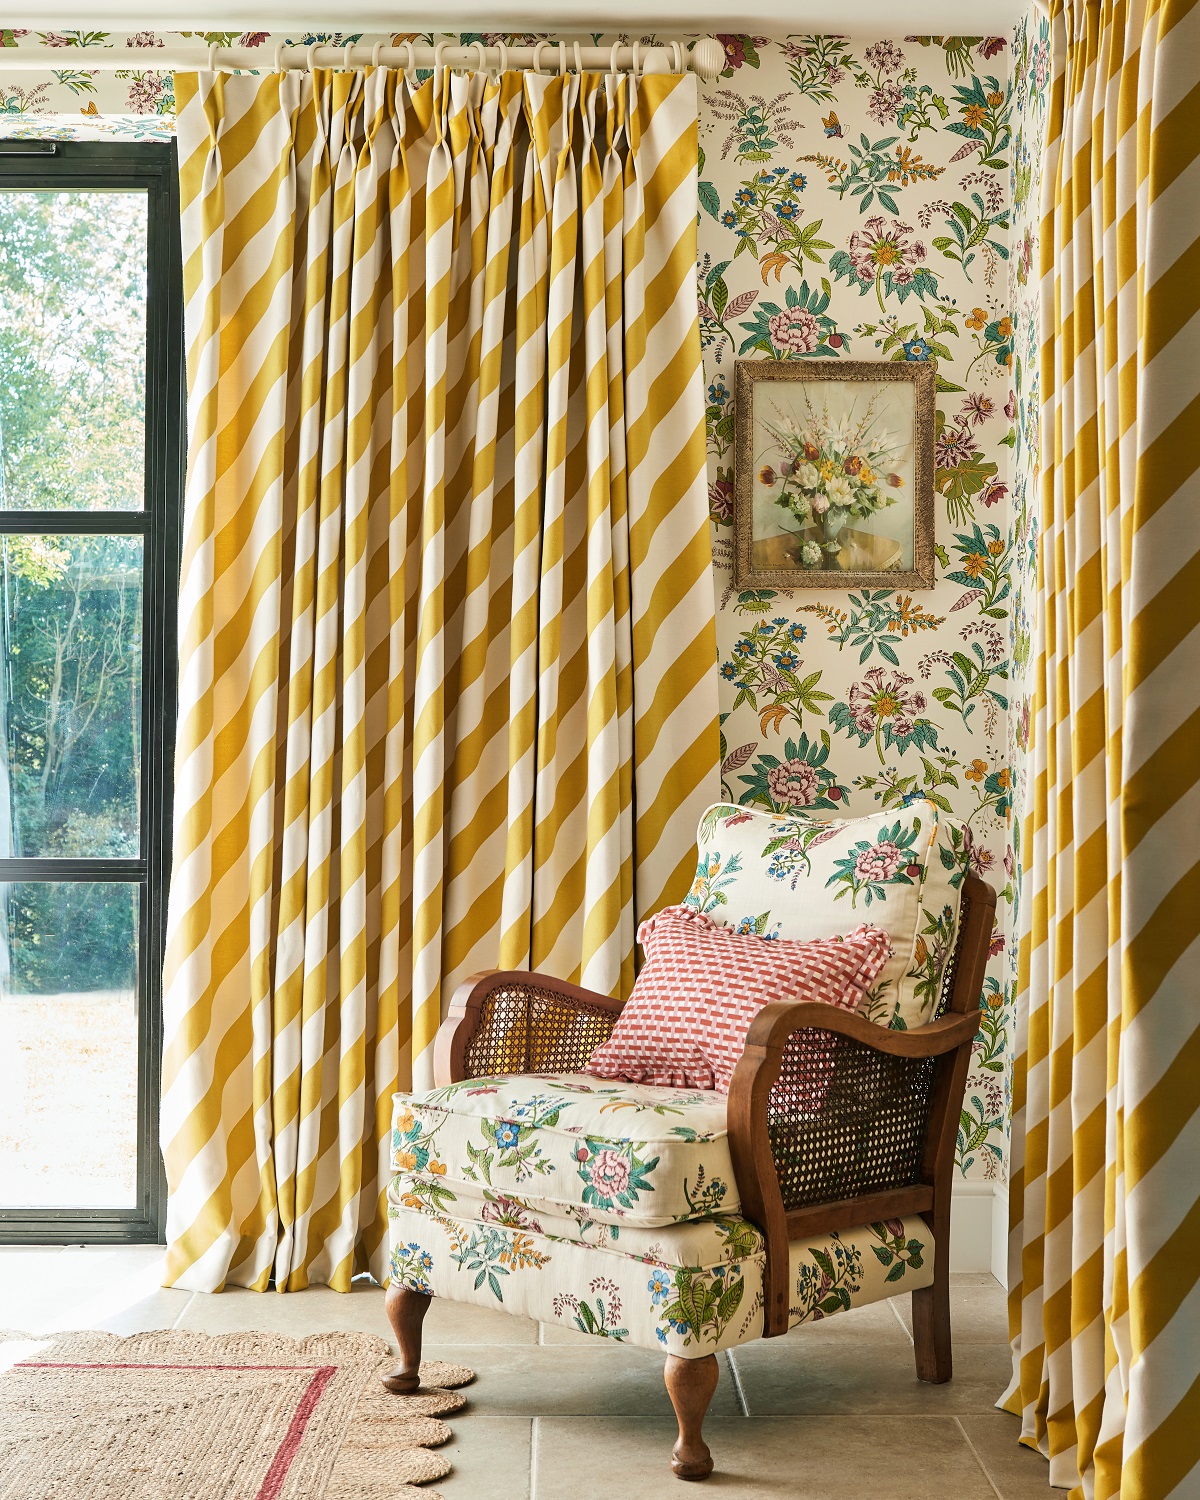 a corner of a room with bold yellow striped full length curtains behind a contrasting chair upholstered in floral fabric